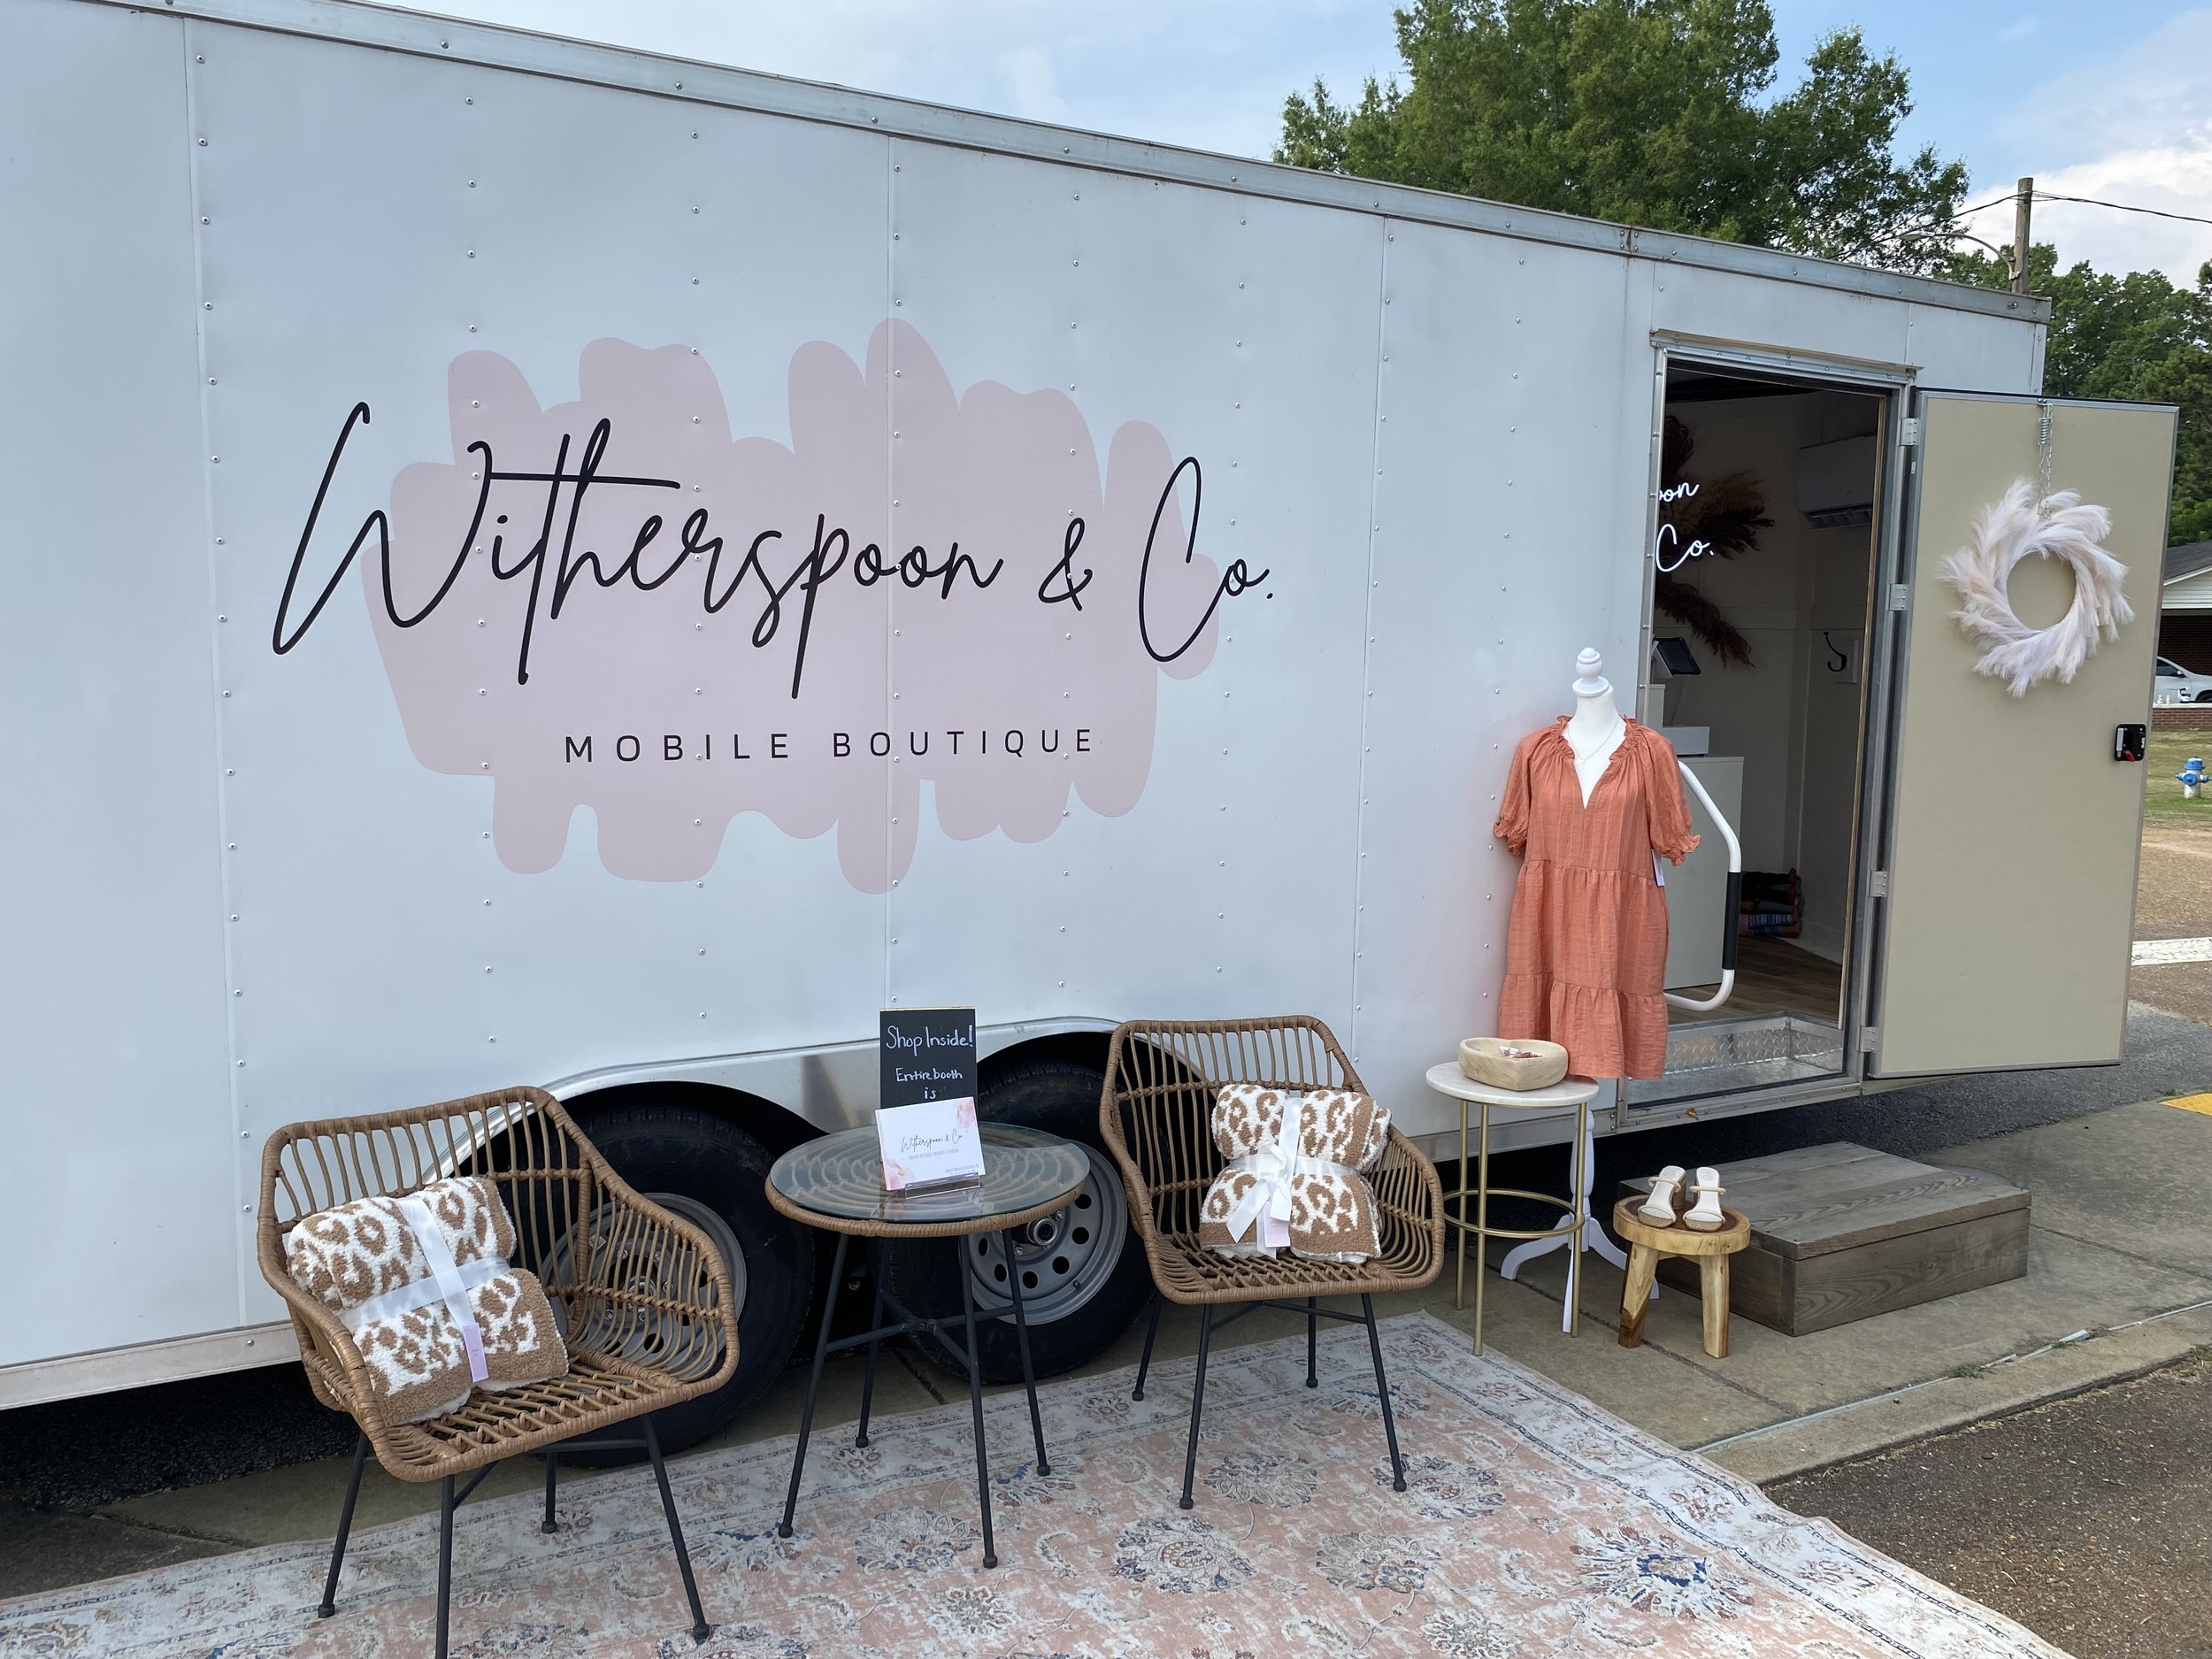 Witherspoon & Co. (Clothing Boutique) Trenton TN